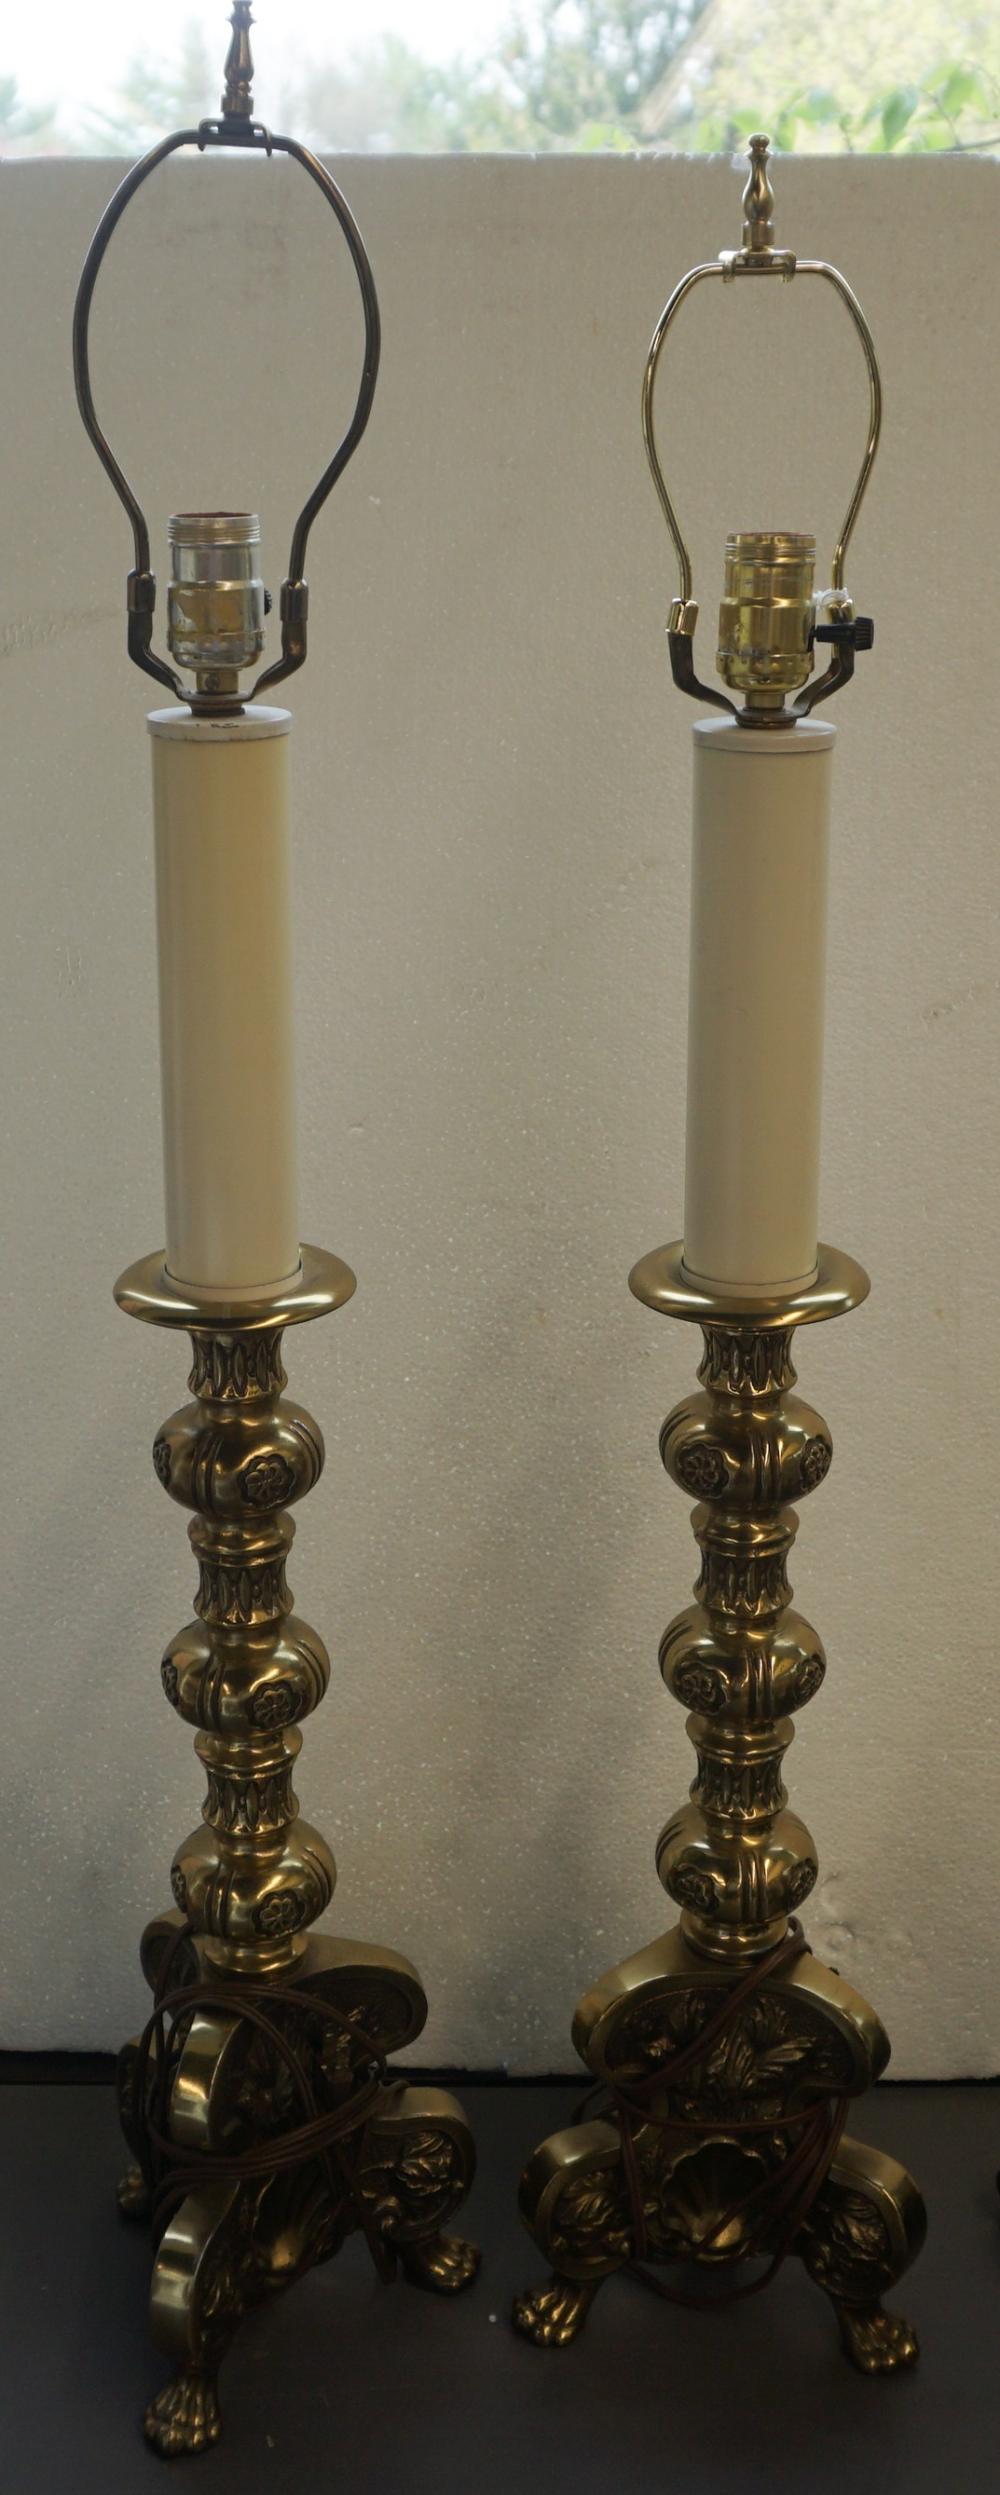 PAIR OF BAROQUE STYLE BRASS CANDLESTICKS,